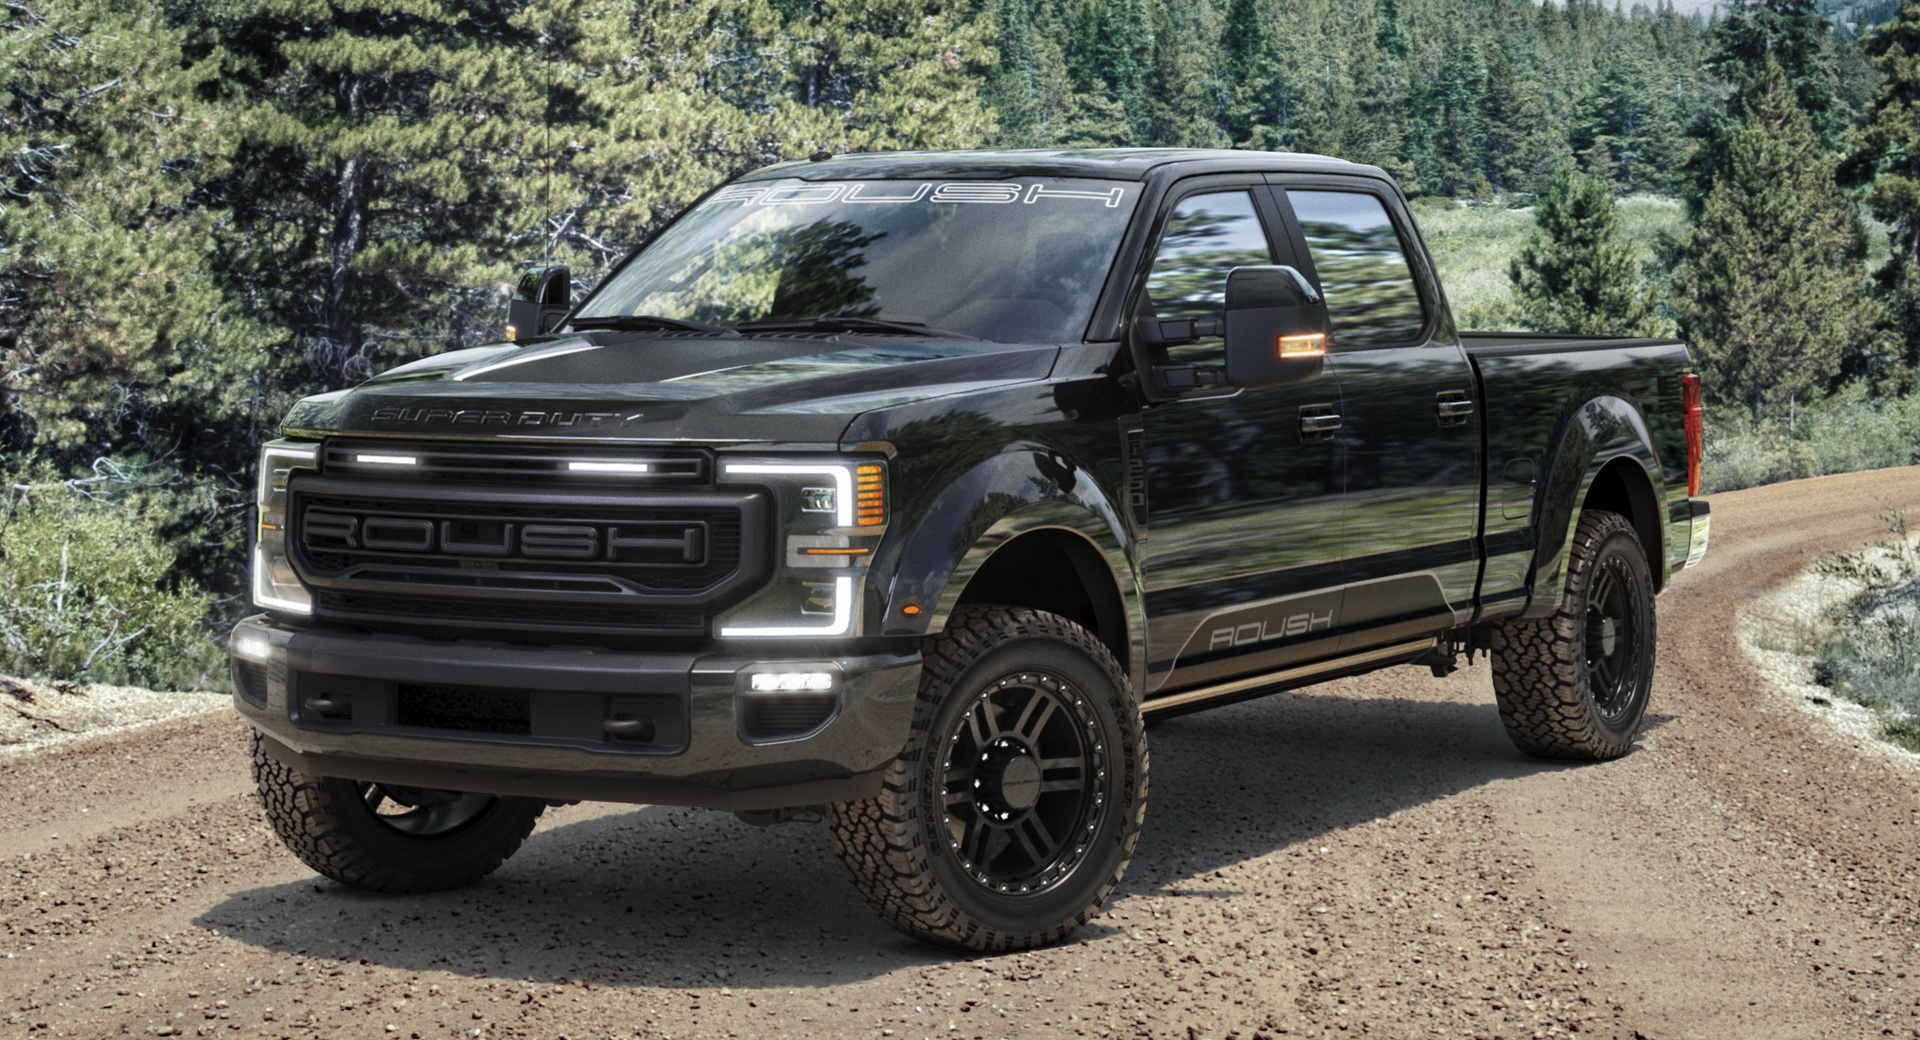 New Roush Super Duty Mods Available On 2020 Ford F-250 And F-350 Trucks